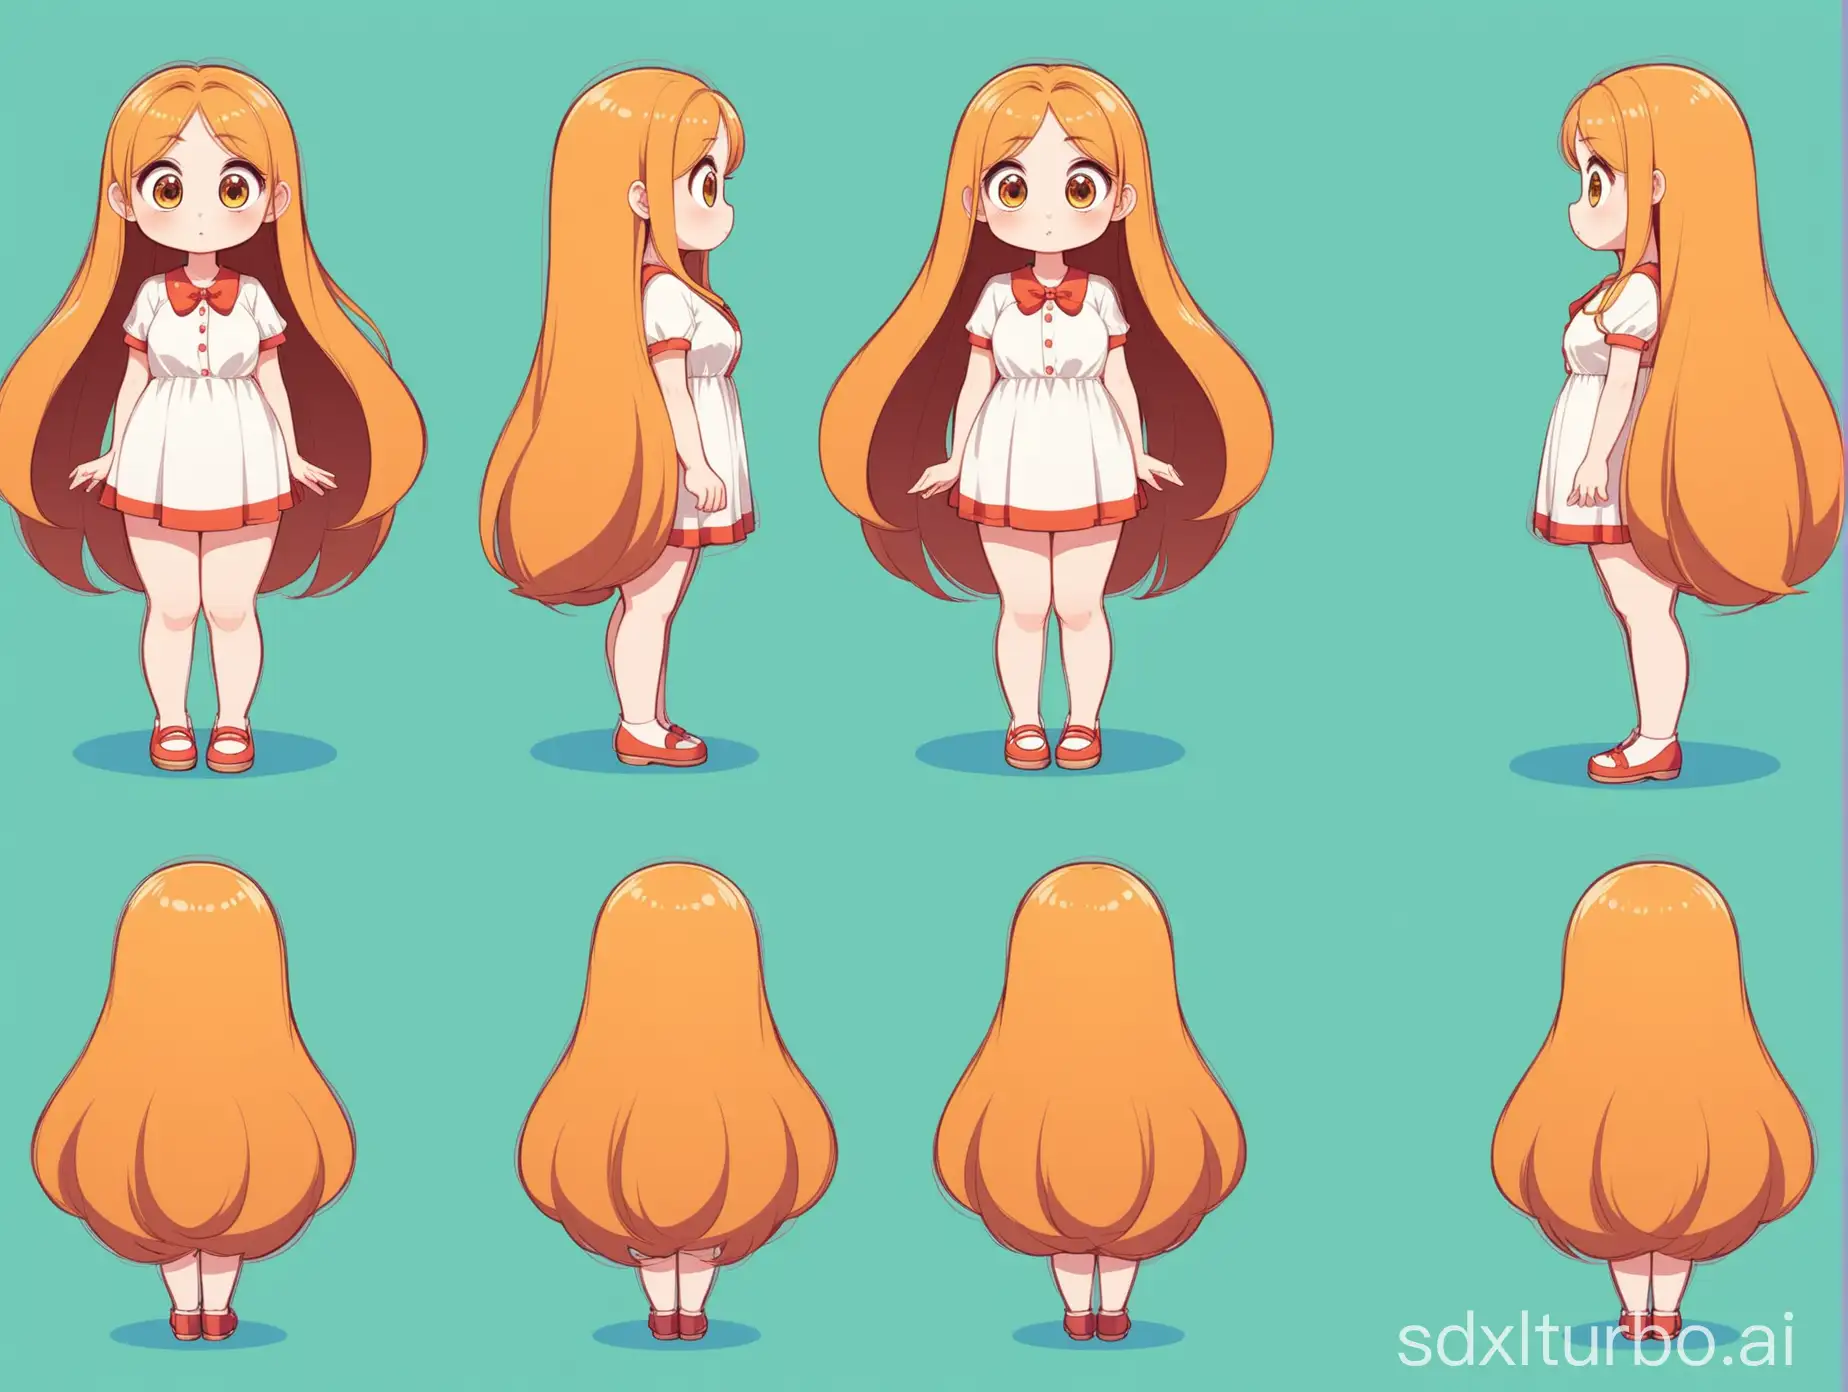 A girl, long hair, big eyes, cute, full figure, five perspectives, front view, side view, rear view, three-quarter angle image, cartoon animation